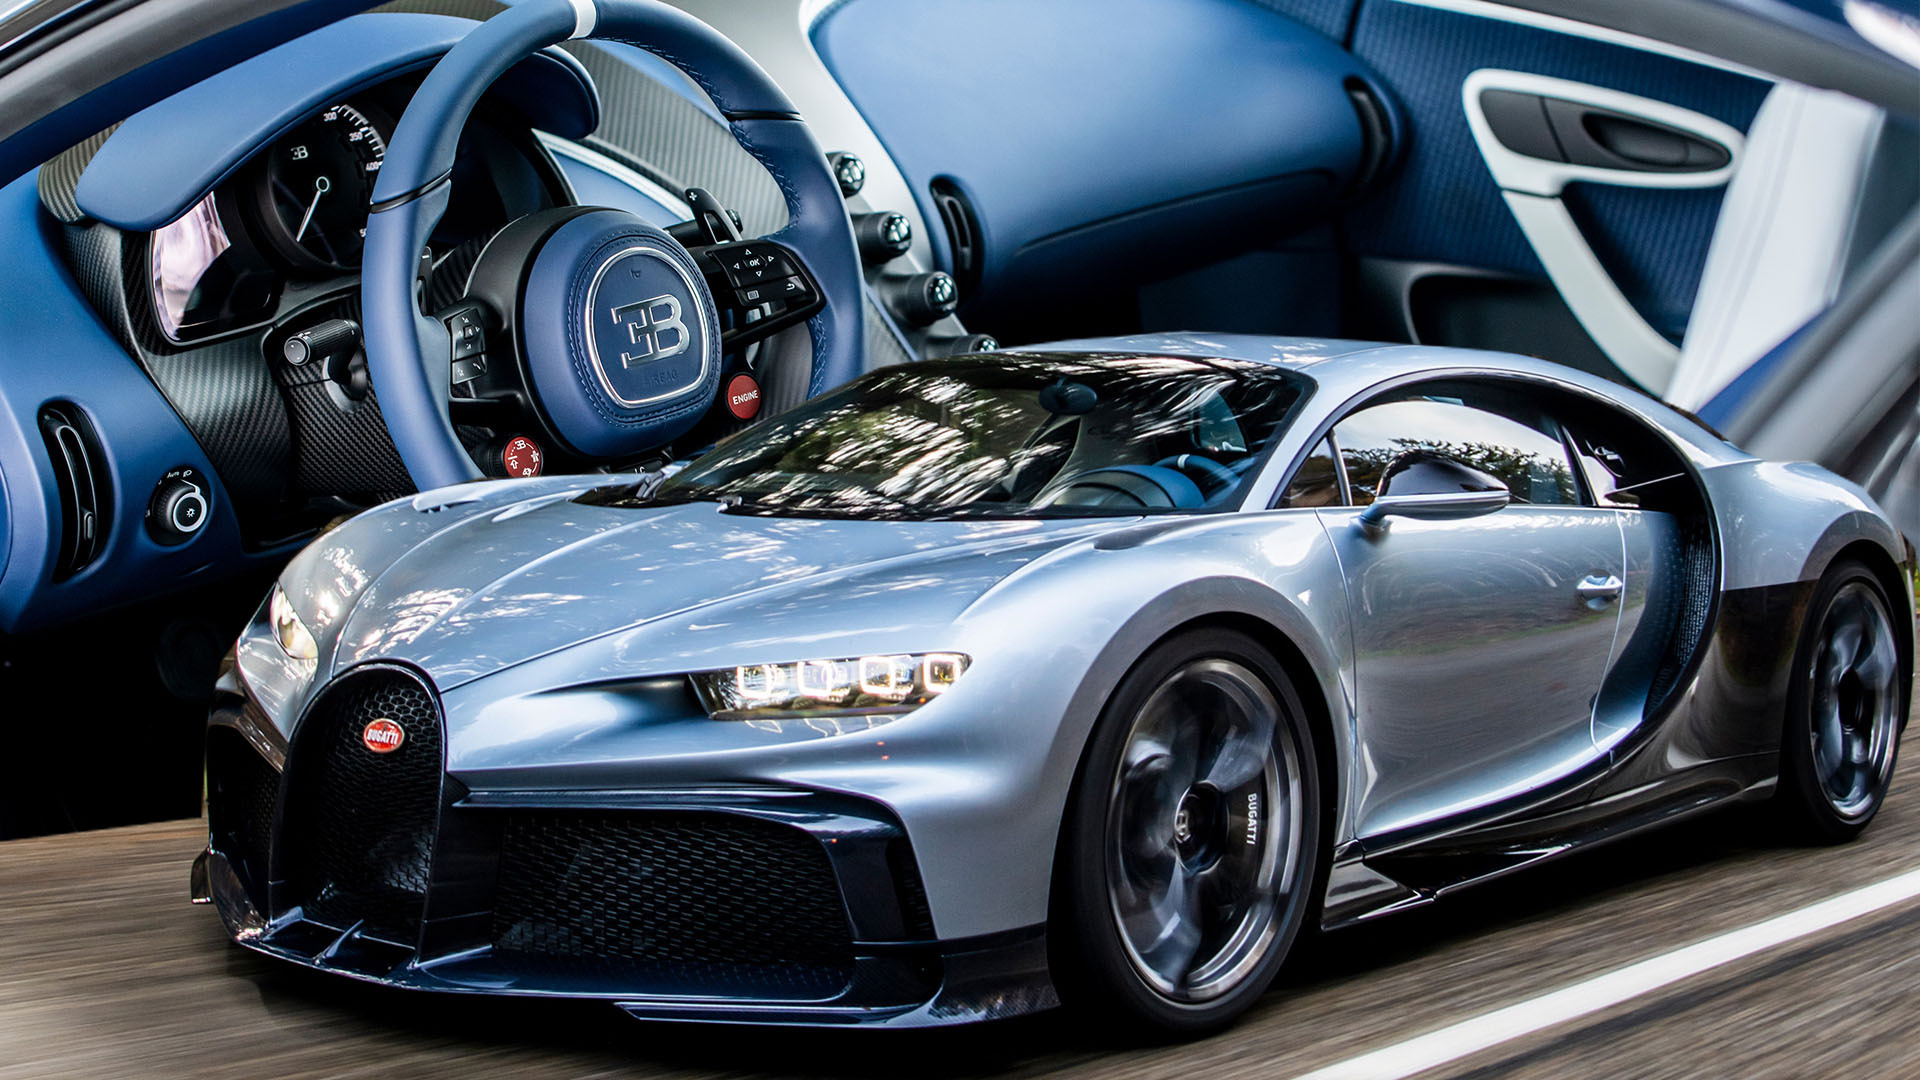 Bugatti Chiron Profileé Is One-Off Pur Sport Doesn't Skimp On Luxury |